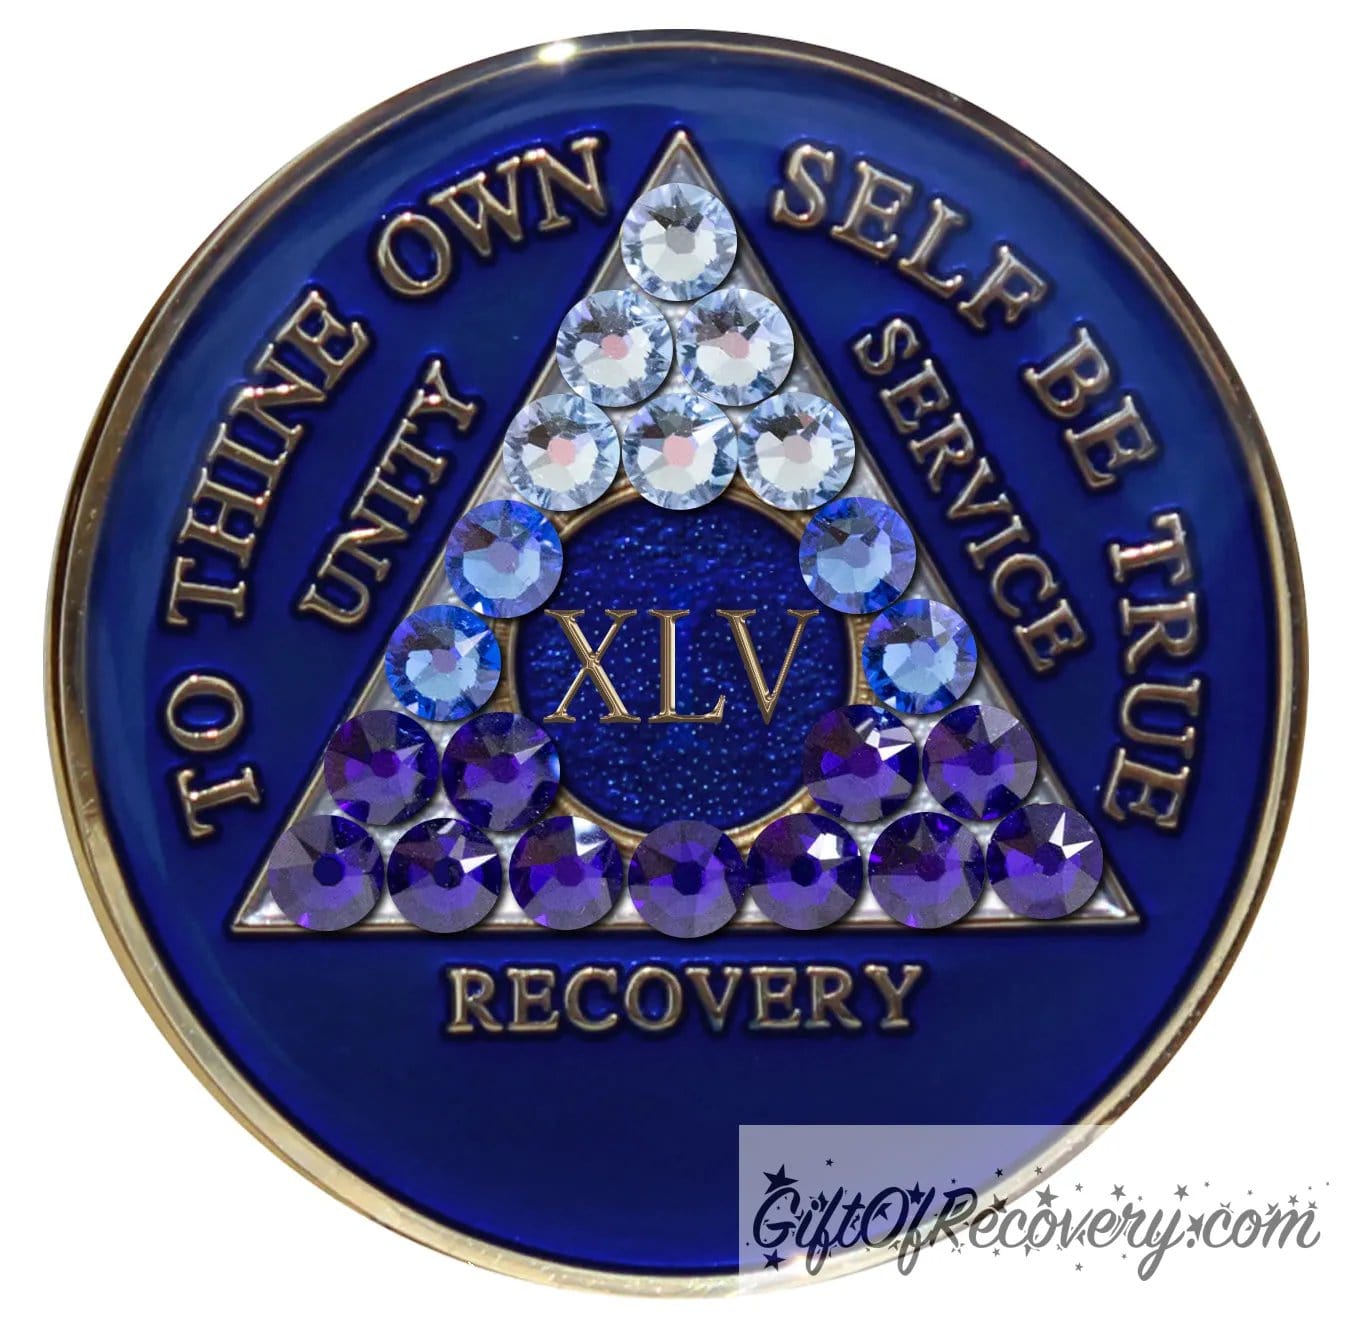 45 year Big Book Blue AA medallion with 21 genuine crystals forming the triangle, going from light to dark blue to represent transitions in your recovery journey, the center circle is blue sparkle, with the roman numeral, AA moto and rim in 14k gold plated brass and resin sealed for a glossy finish.